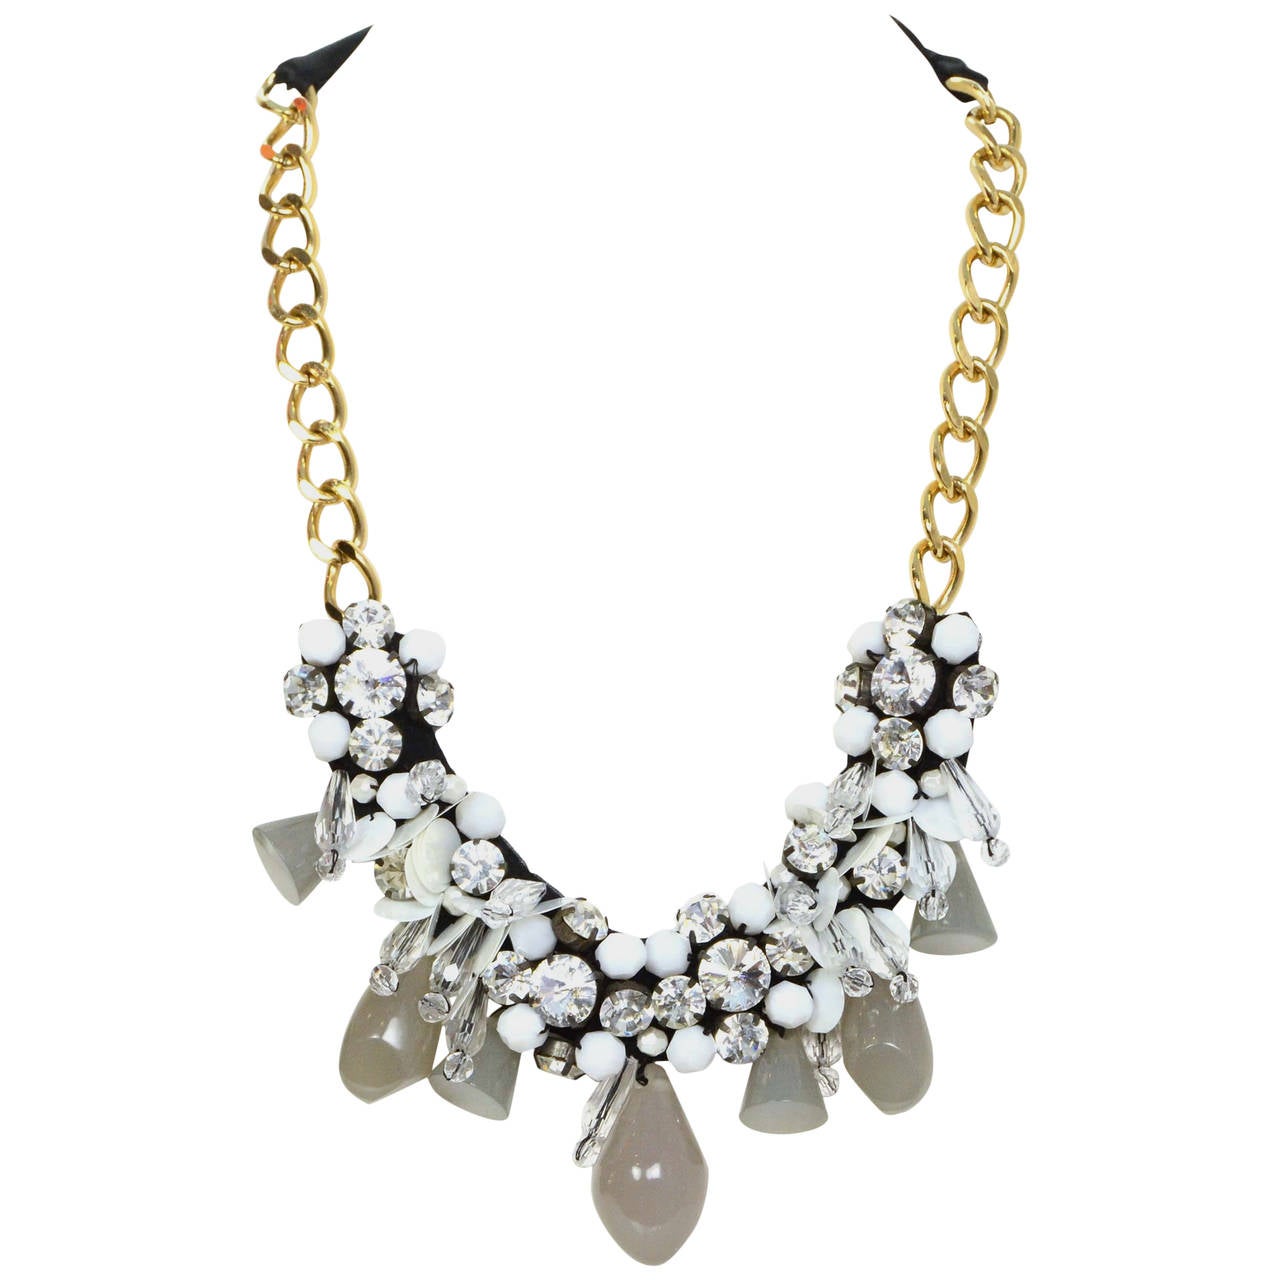 MARNI White & Grey Beaded Chain & Tie Necklace